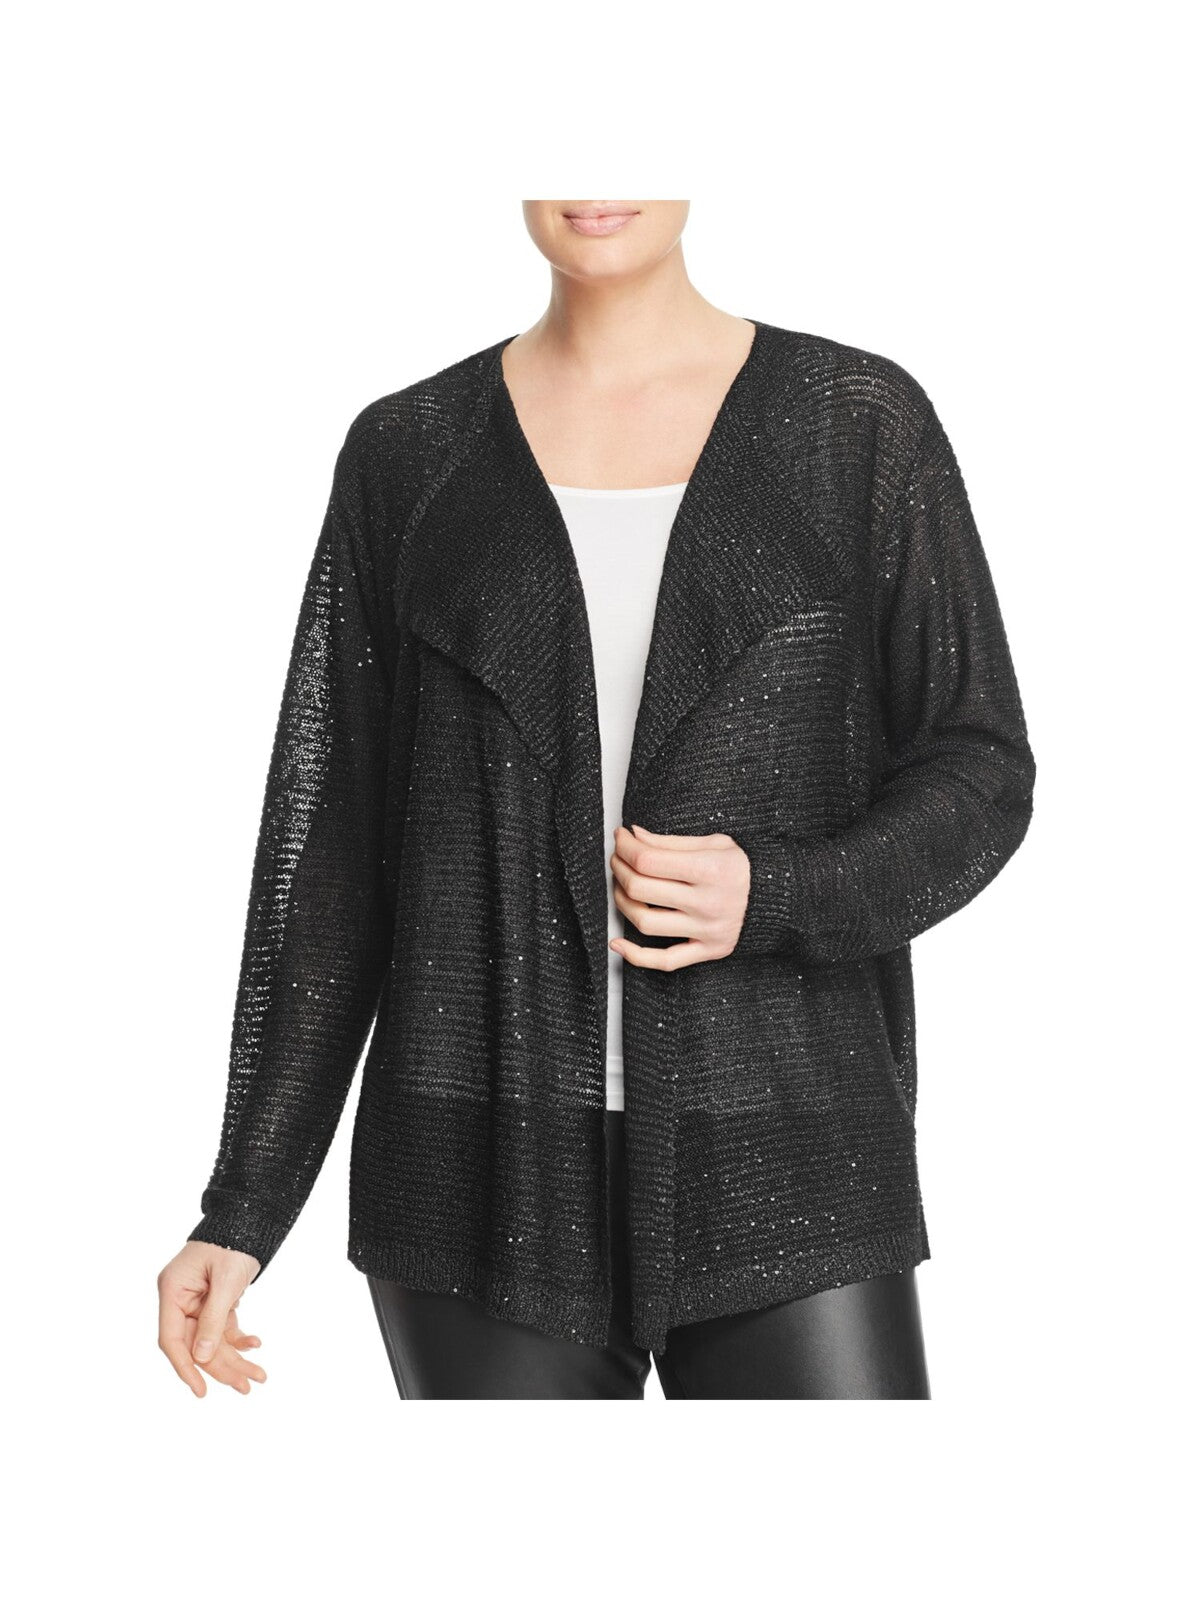 SIONI Womens Black Knit Sequined Chiffon Layered Long Sleeve Open Cardigan Party Sweater Plus 3X